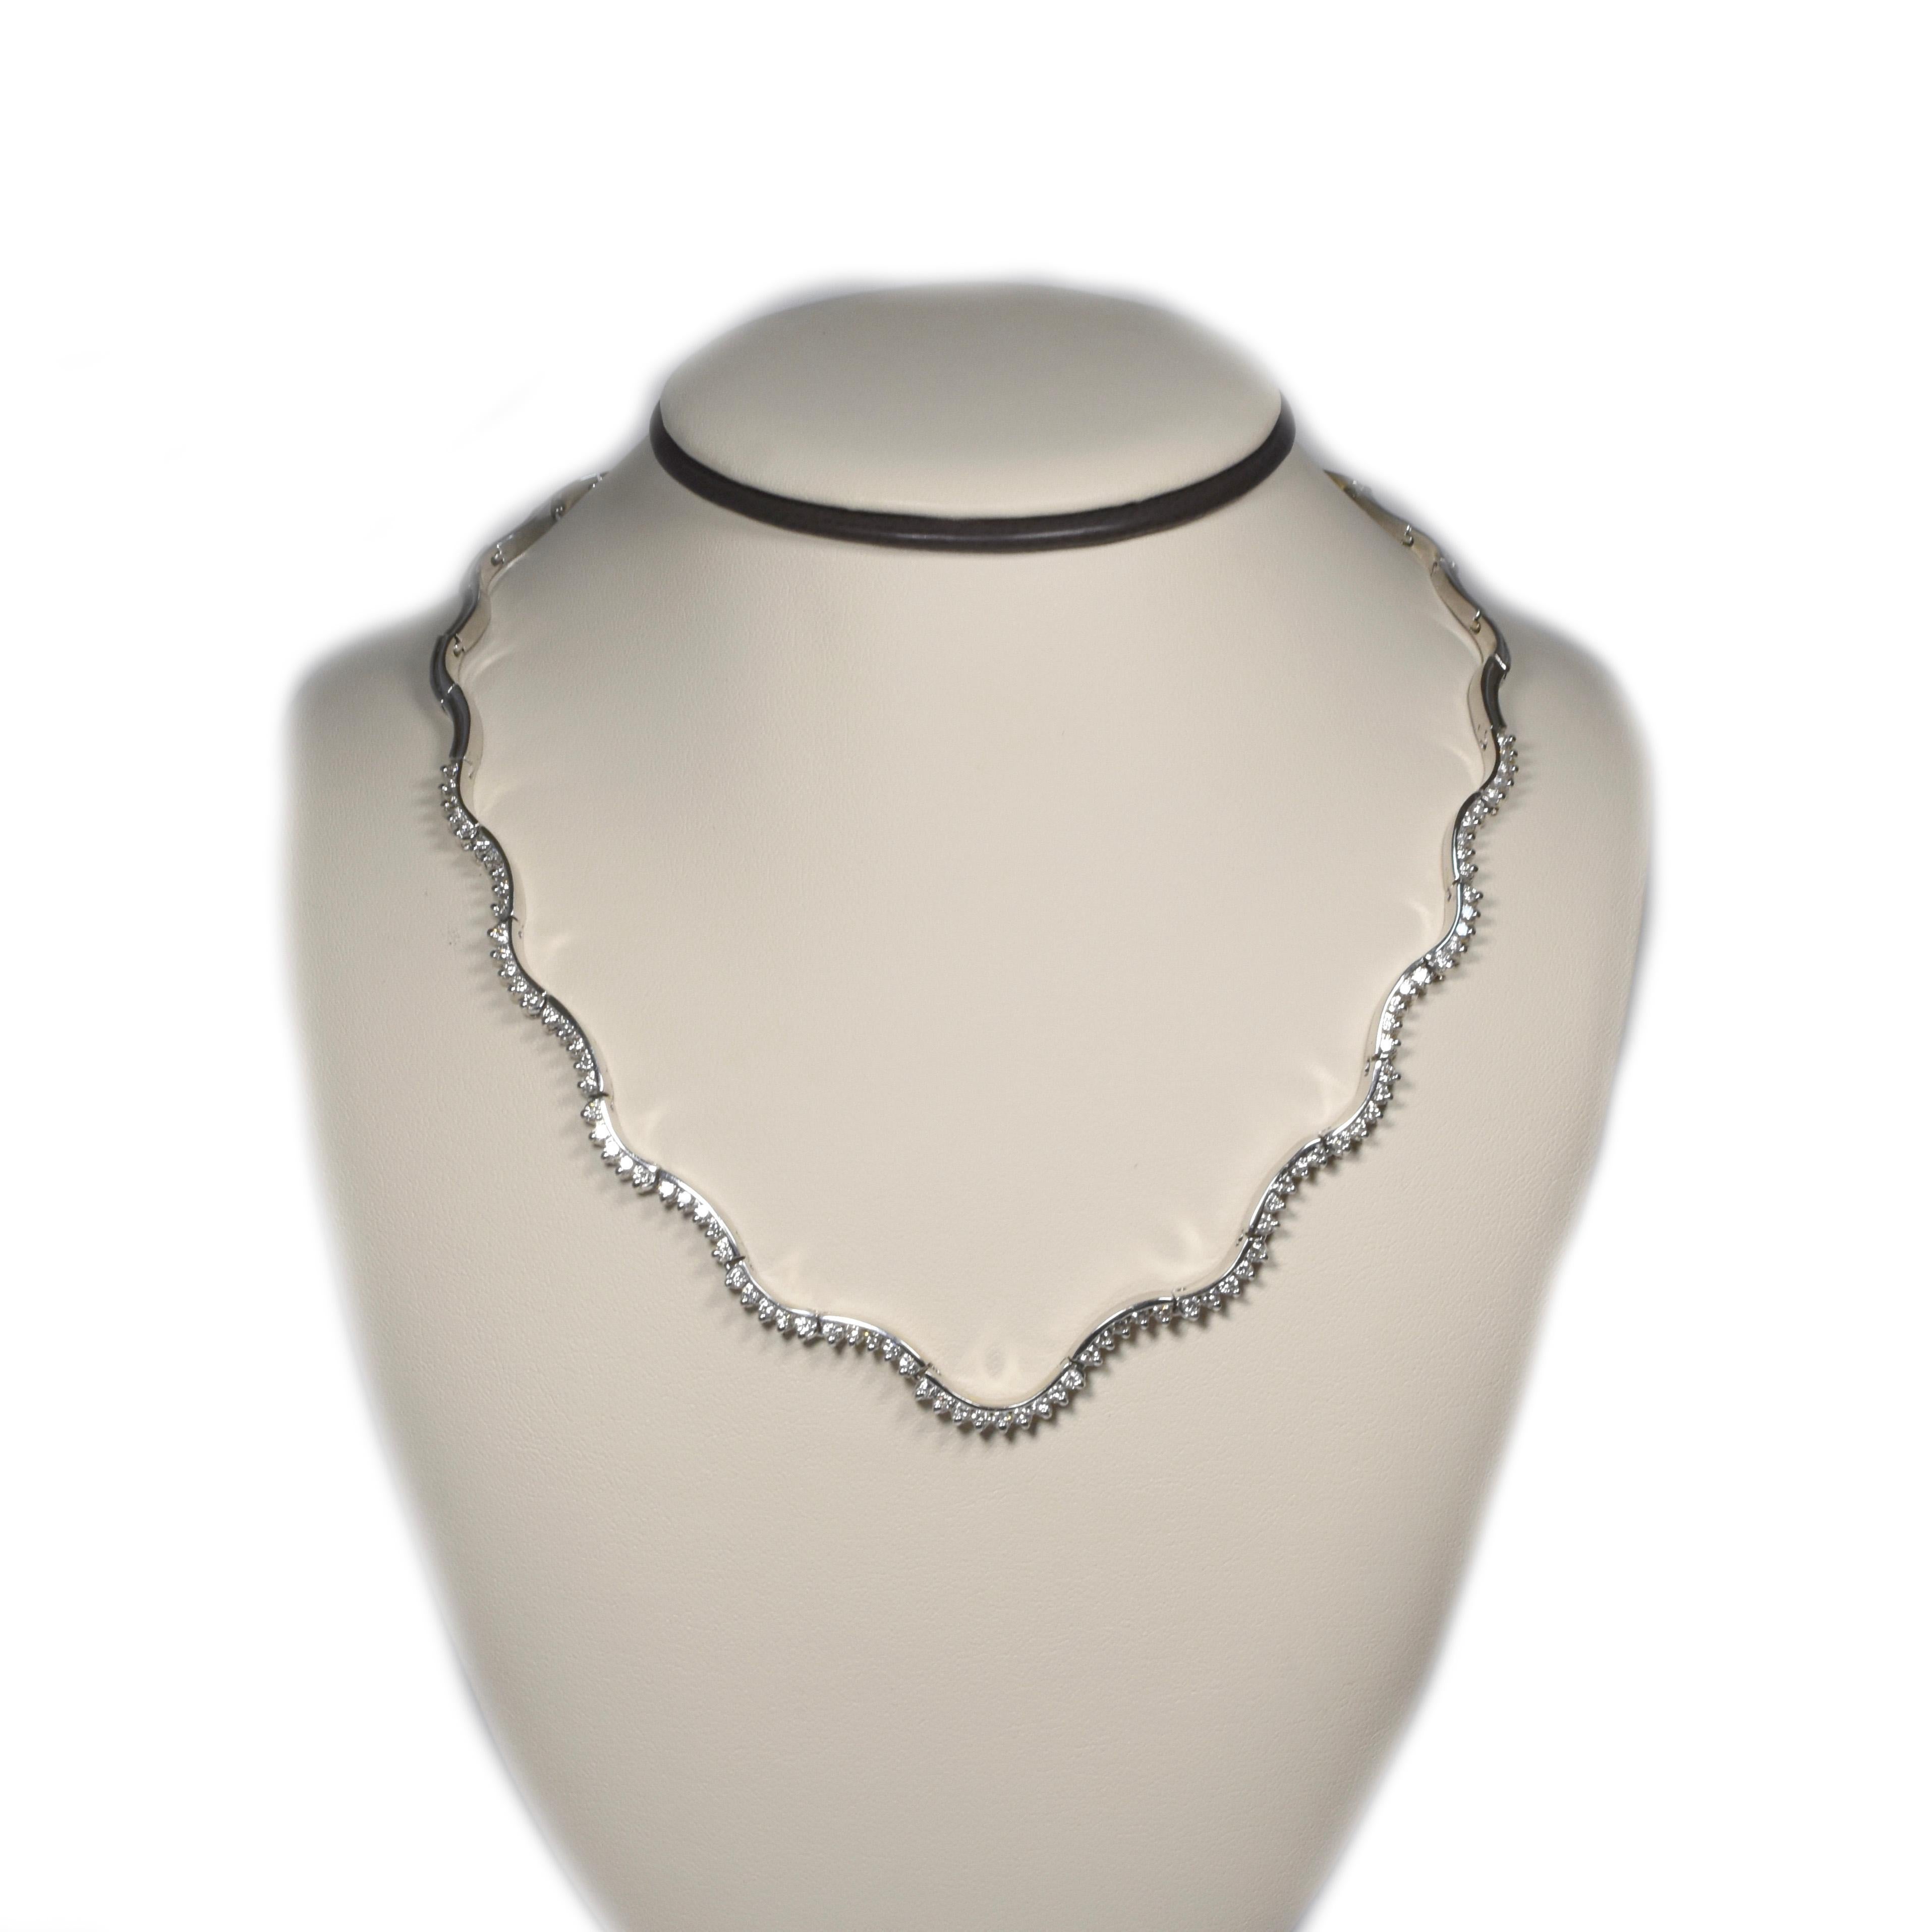 A very special necklace for an evening out, or the perfect accessory to spice up a casual outfit; this wavy and articulated diamond tennis necklace features 89 round brilliant cut diamonds sparkling on a 14k white gold mounting, strong impression